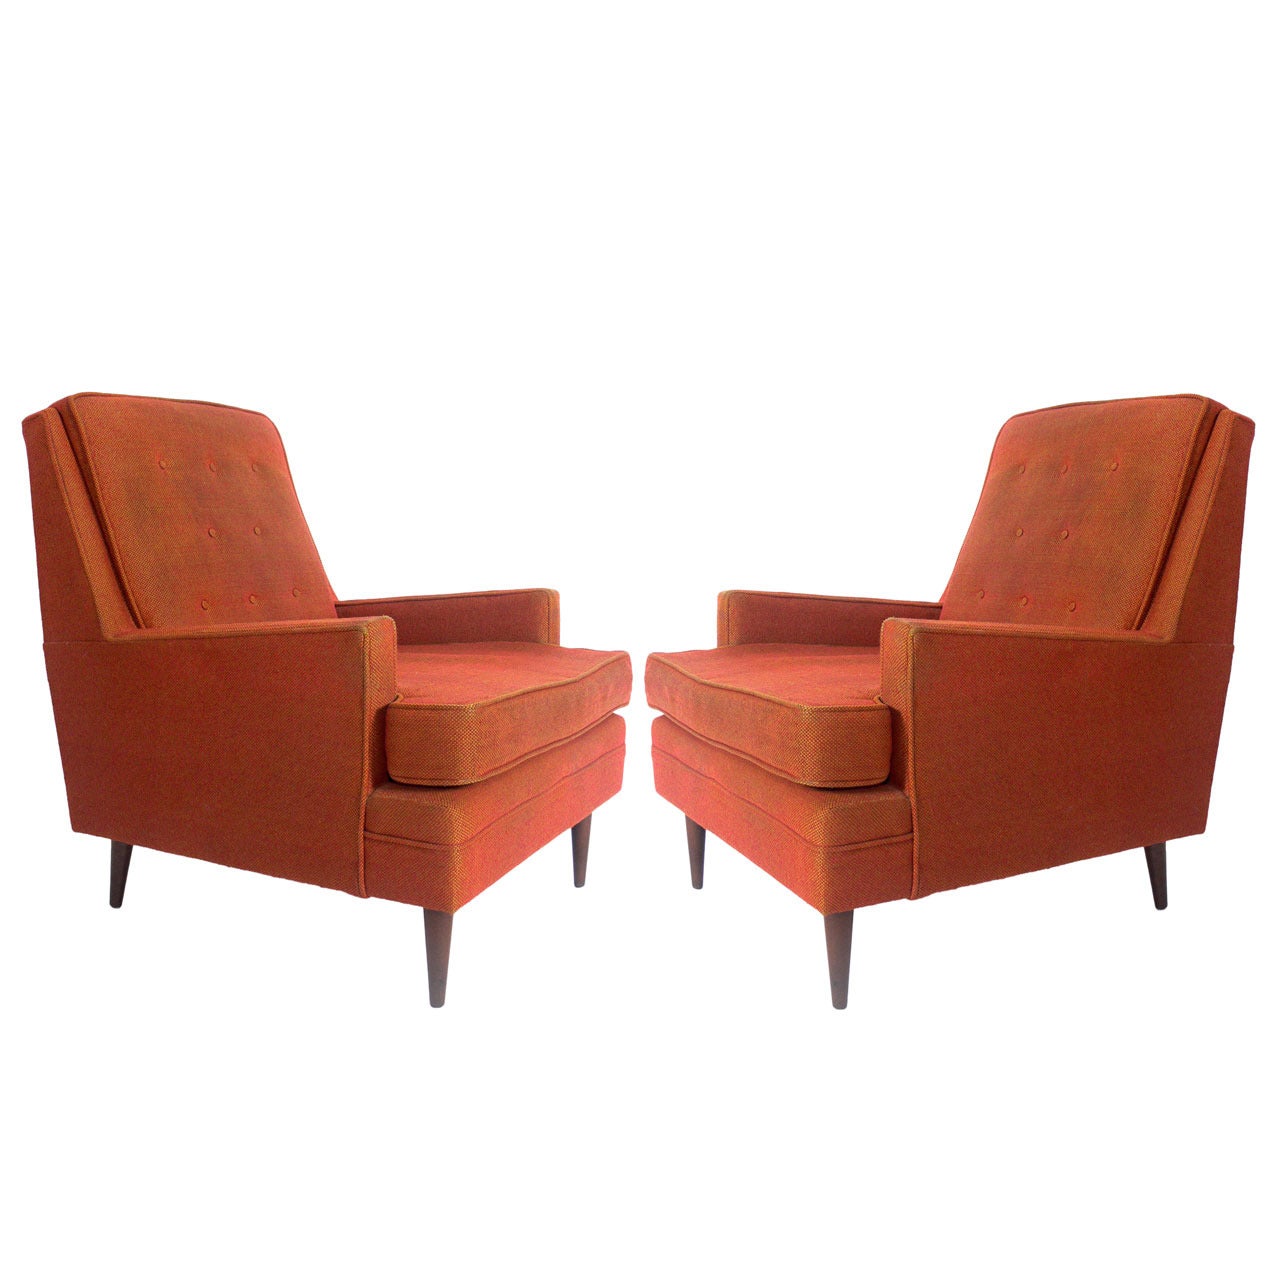 Pair of Clean Lined Modernist Lounge Chairs in the manner of Paul McCobb